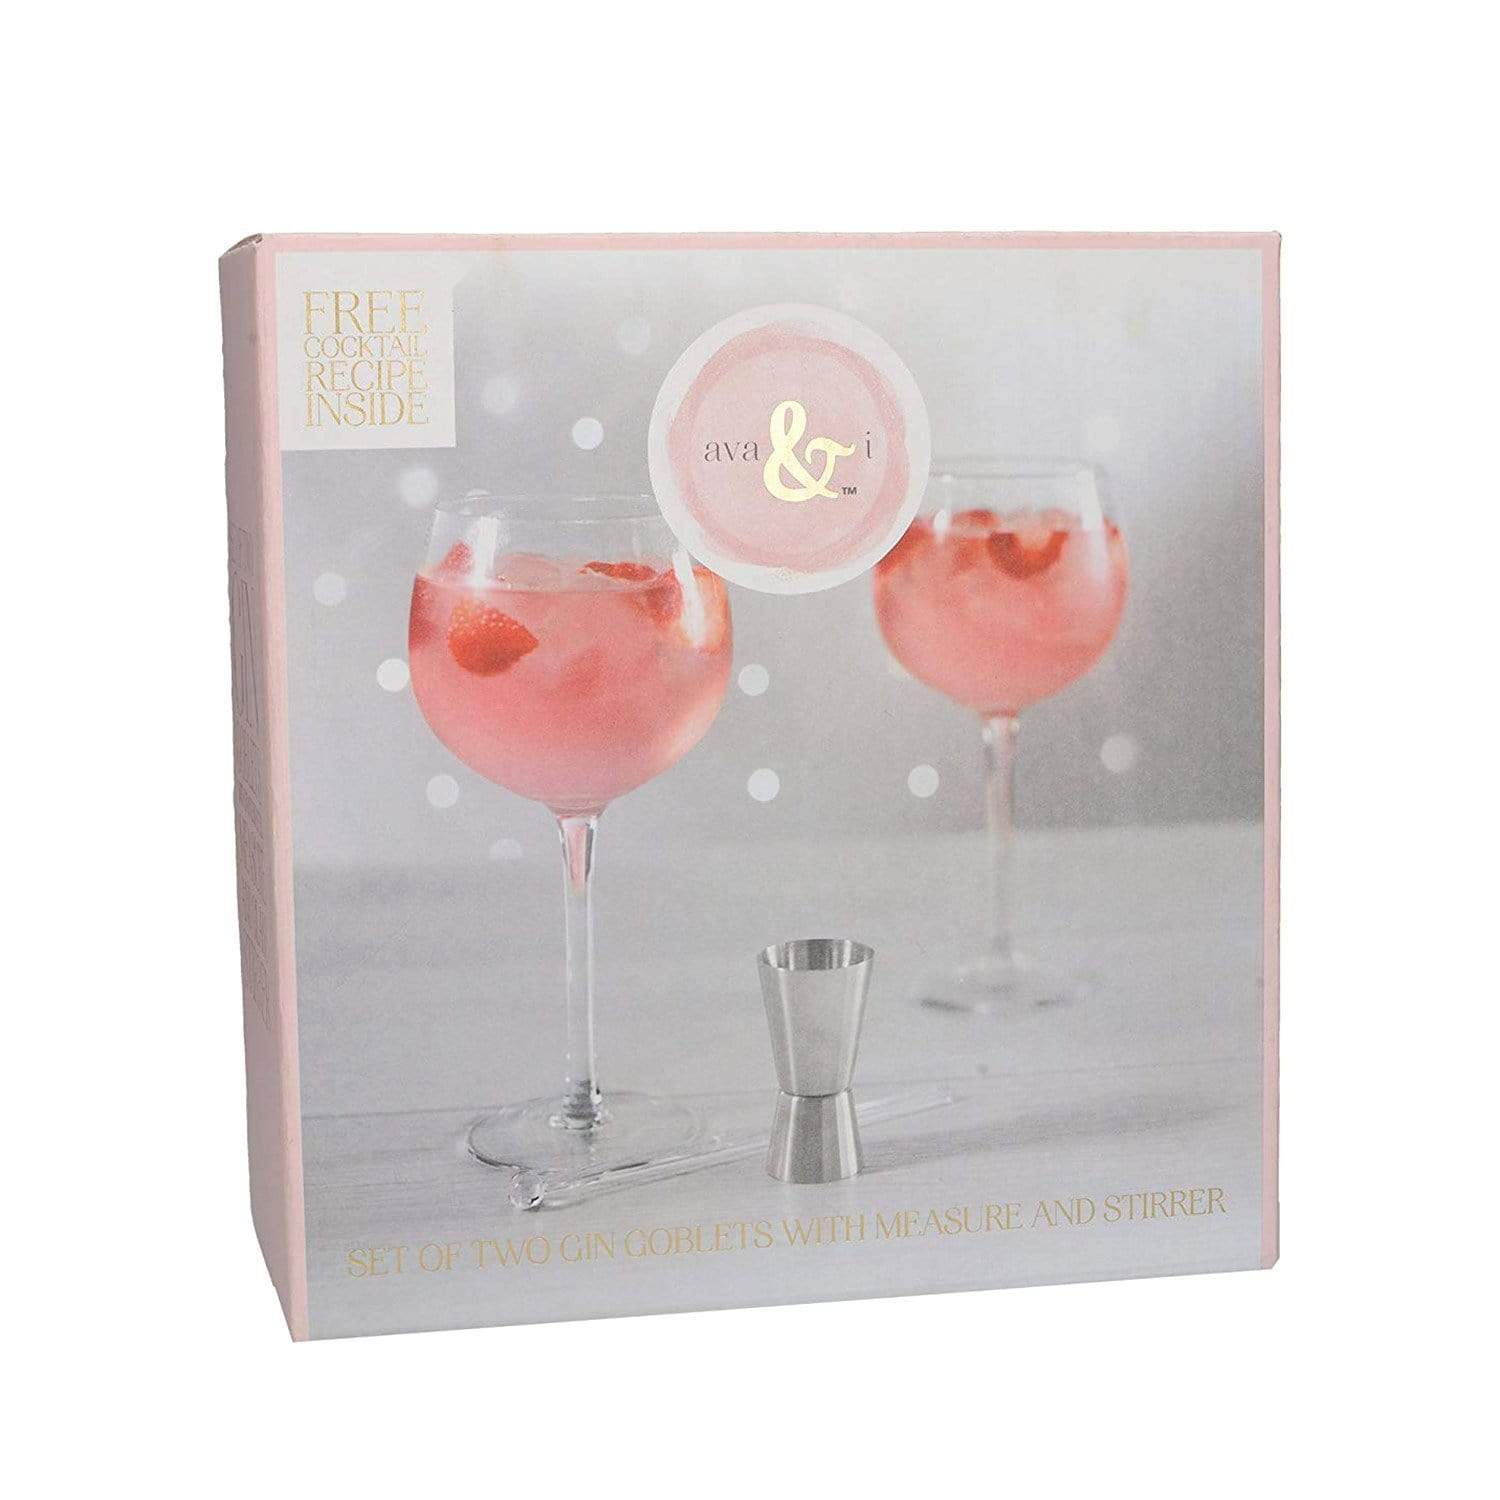 Creative Tops Ava and I Gin Goblet Glass with Stirrer and Jigger Set - Silver and Clear, 600 ml, 2 Piece - 5226397 - Jashanmal Home